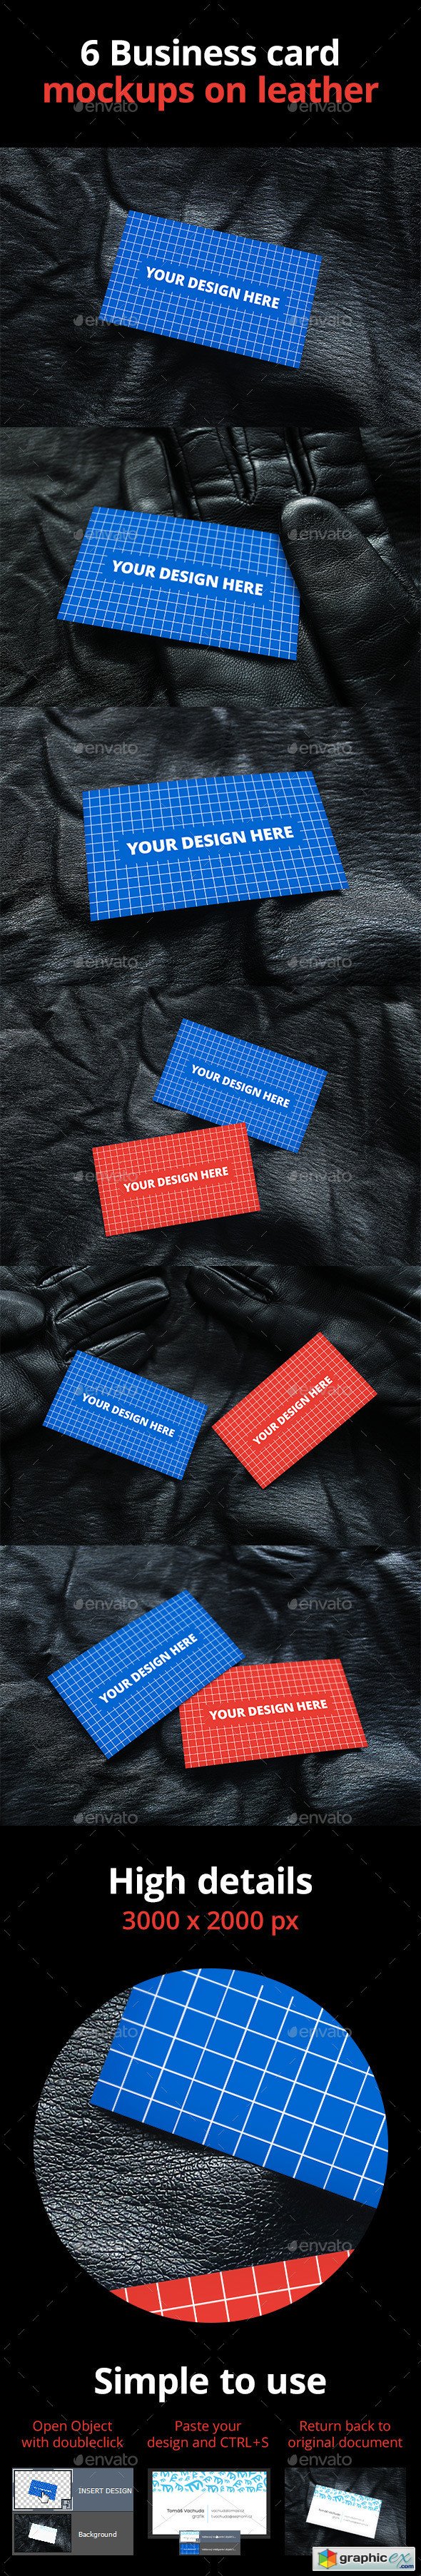 6 Business Card Mockups on Leather